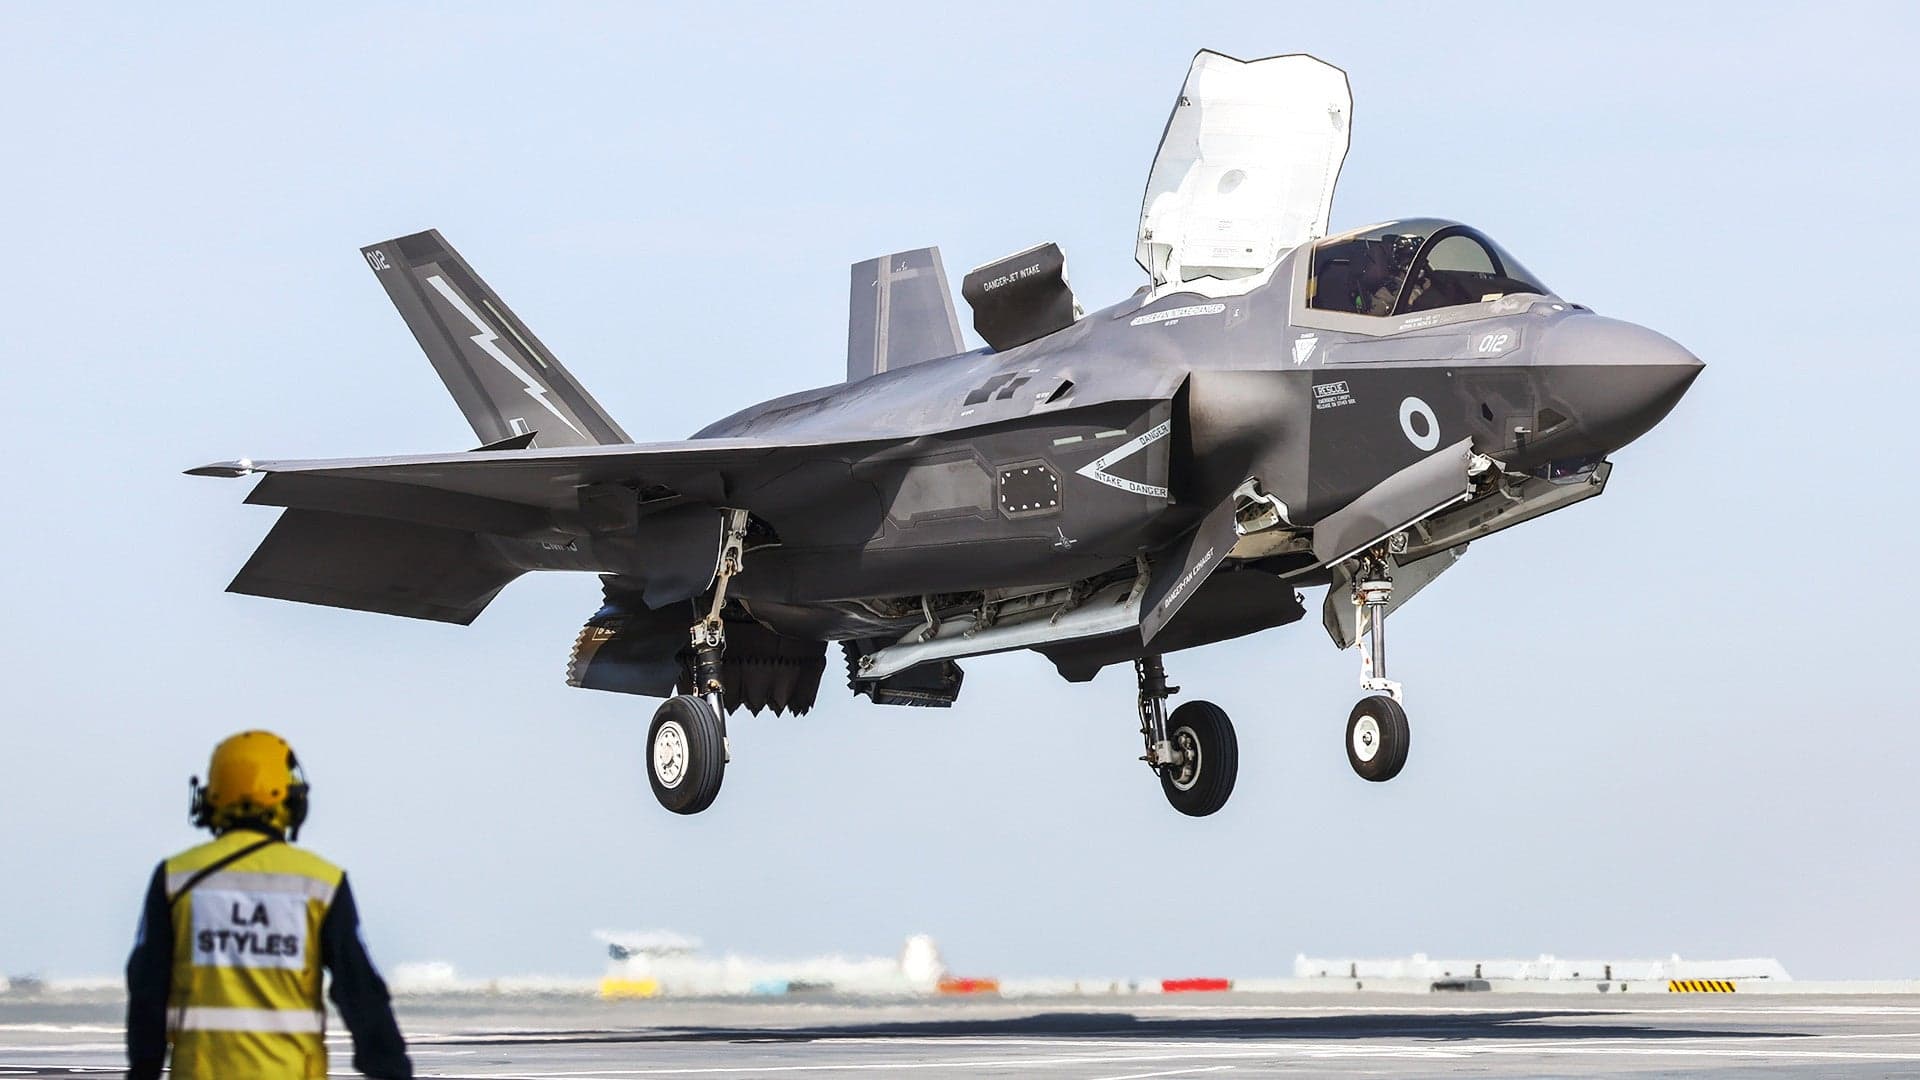 F-35 From The Carrier HMS Queen Elizabeth Has Crashed Into The Sea (Updated)